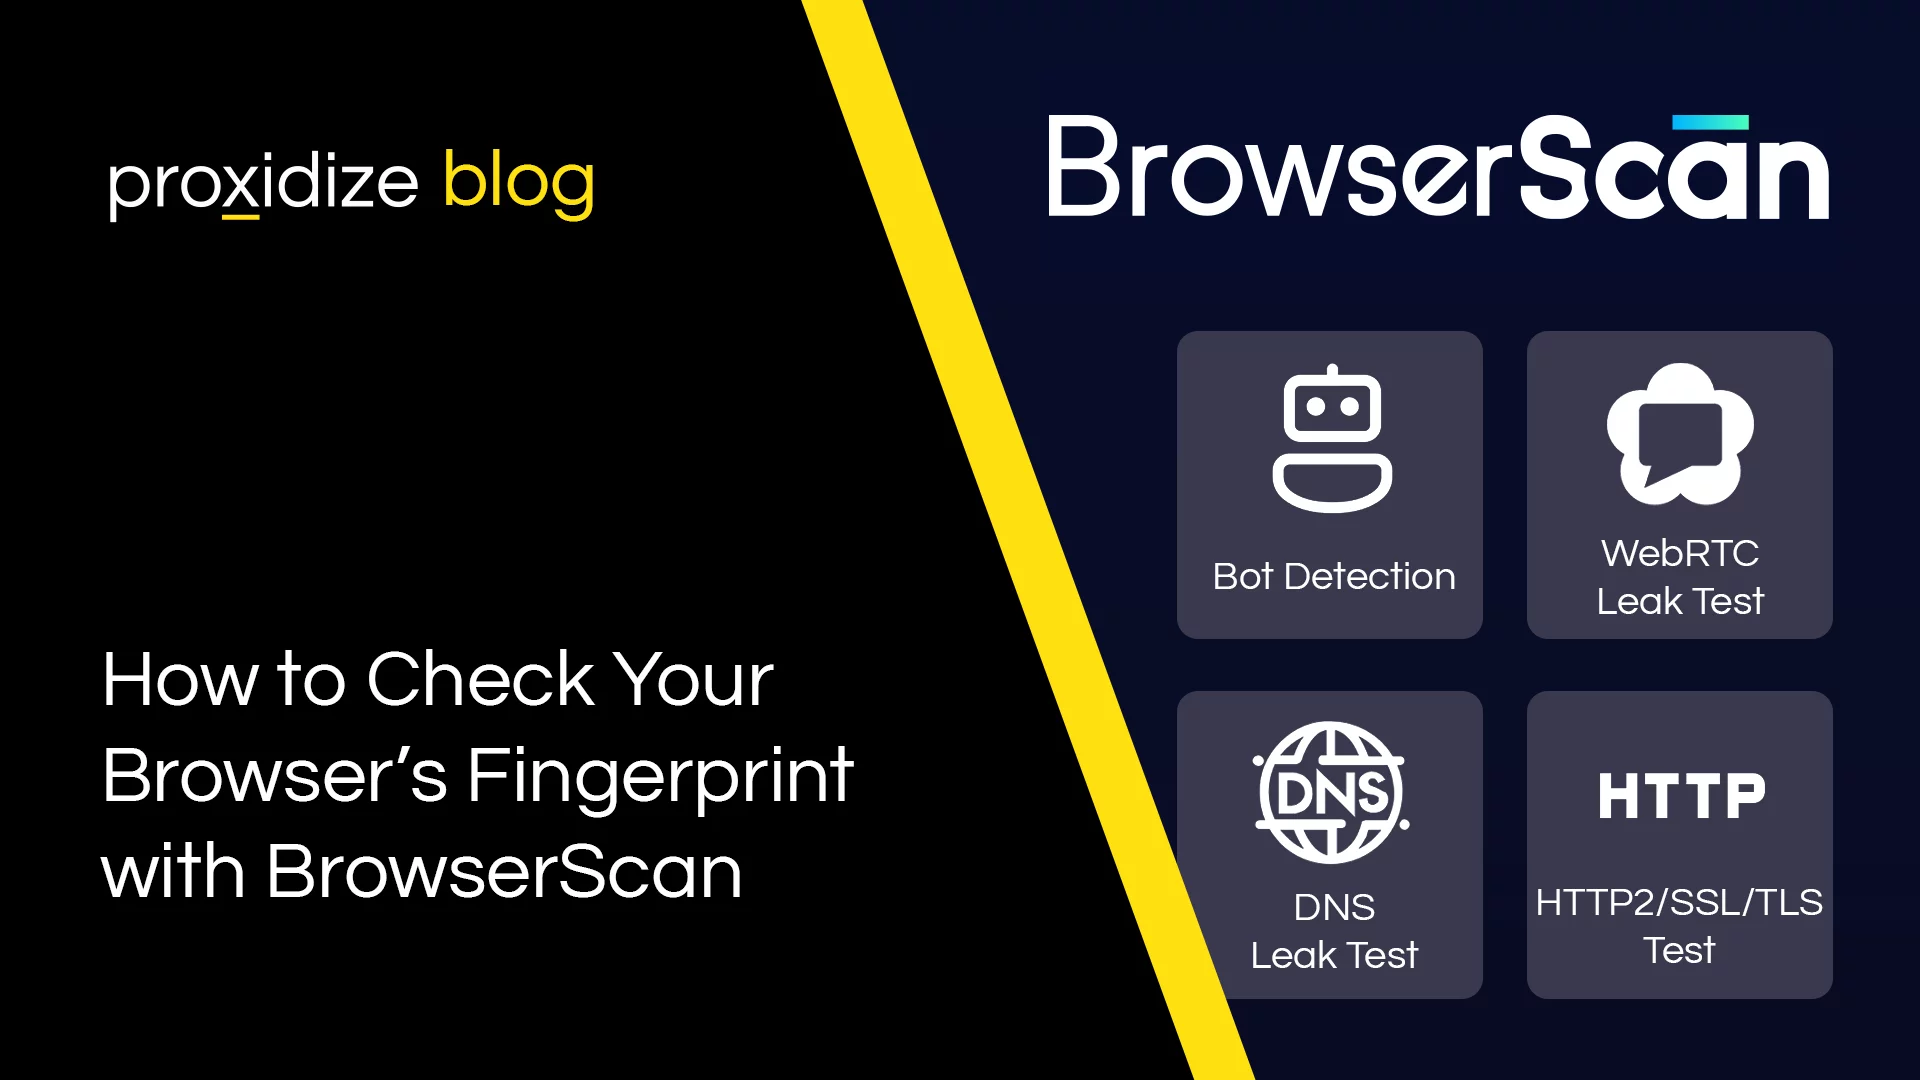 BrowserScan Featured Image